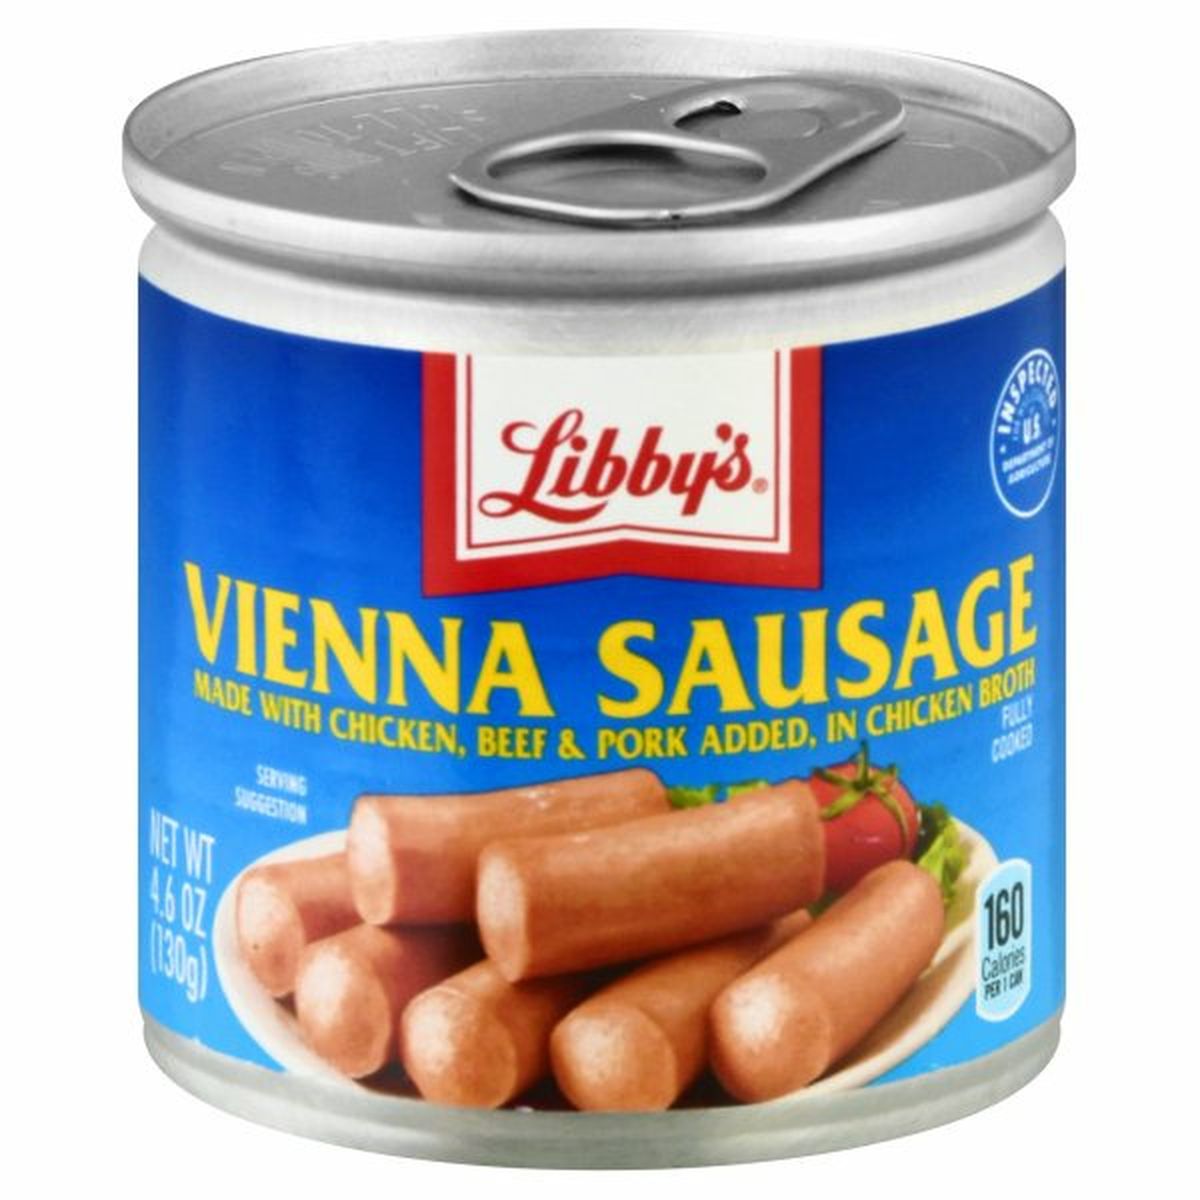 Calories in Libby's Vienna Sausage